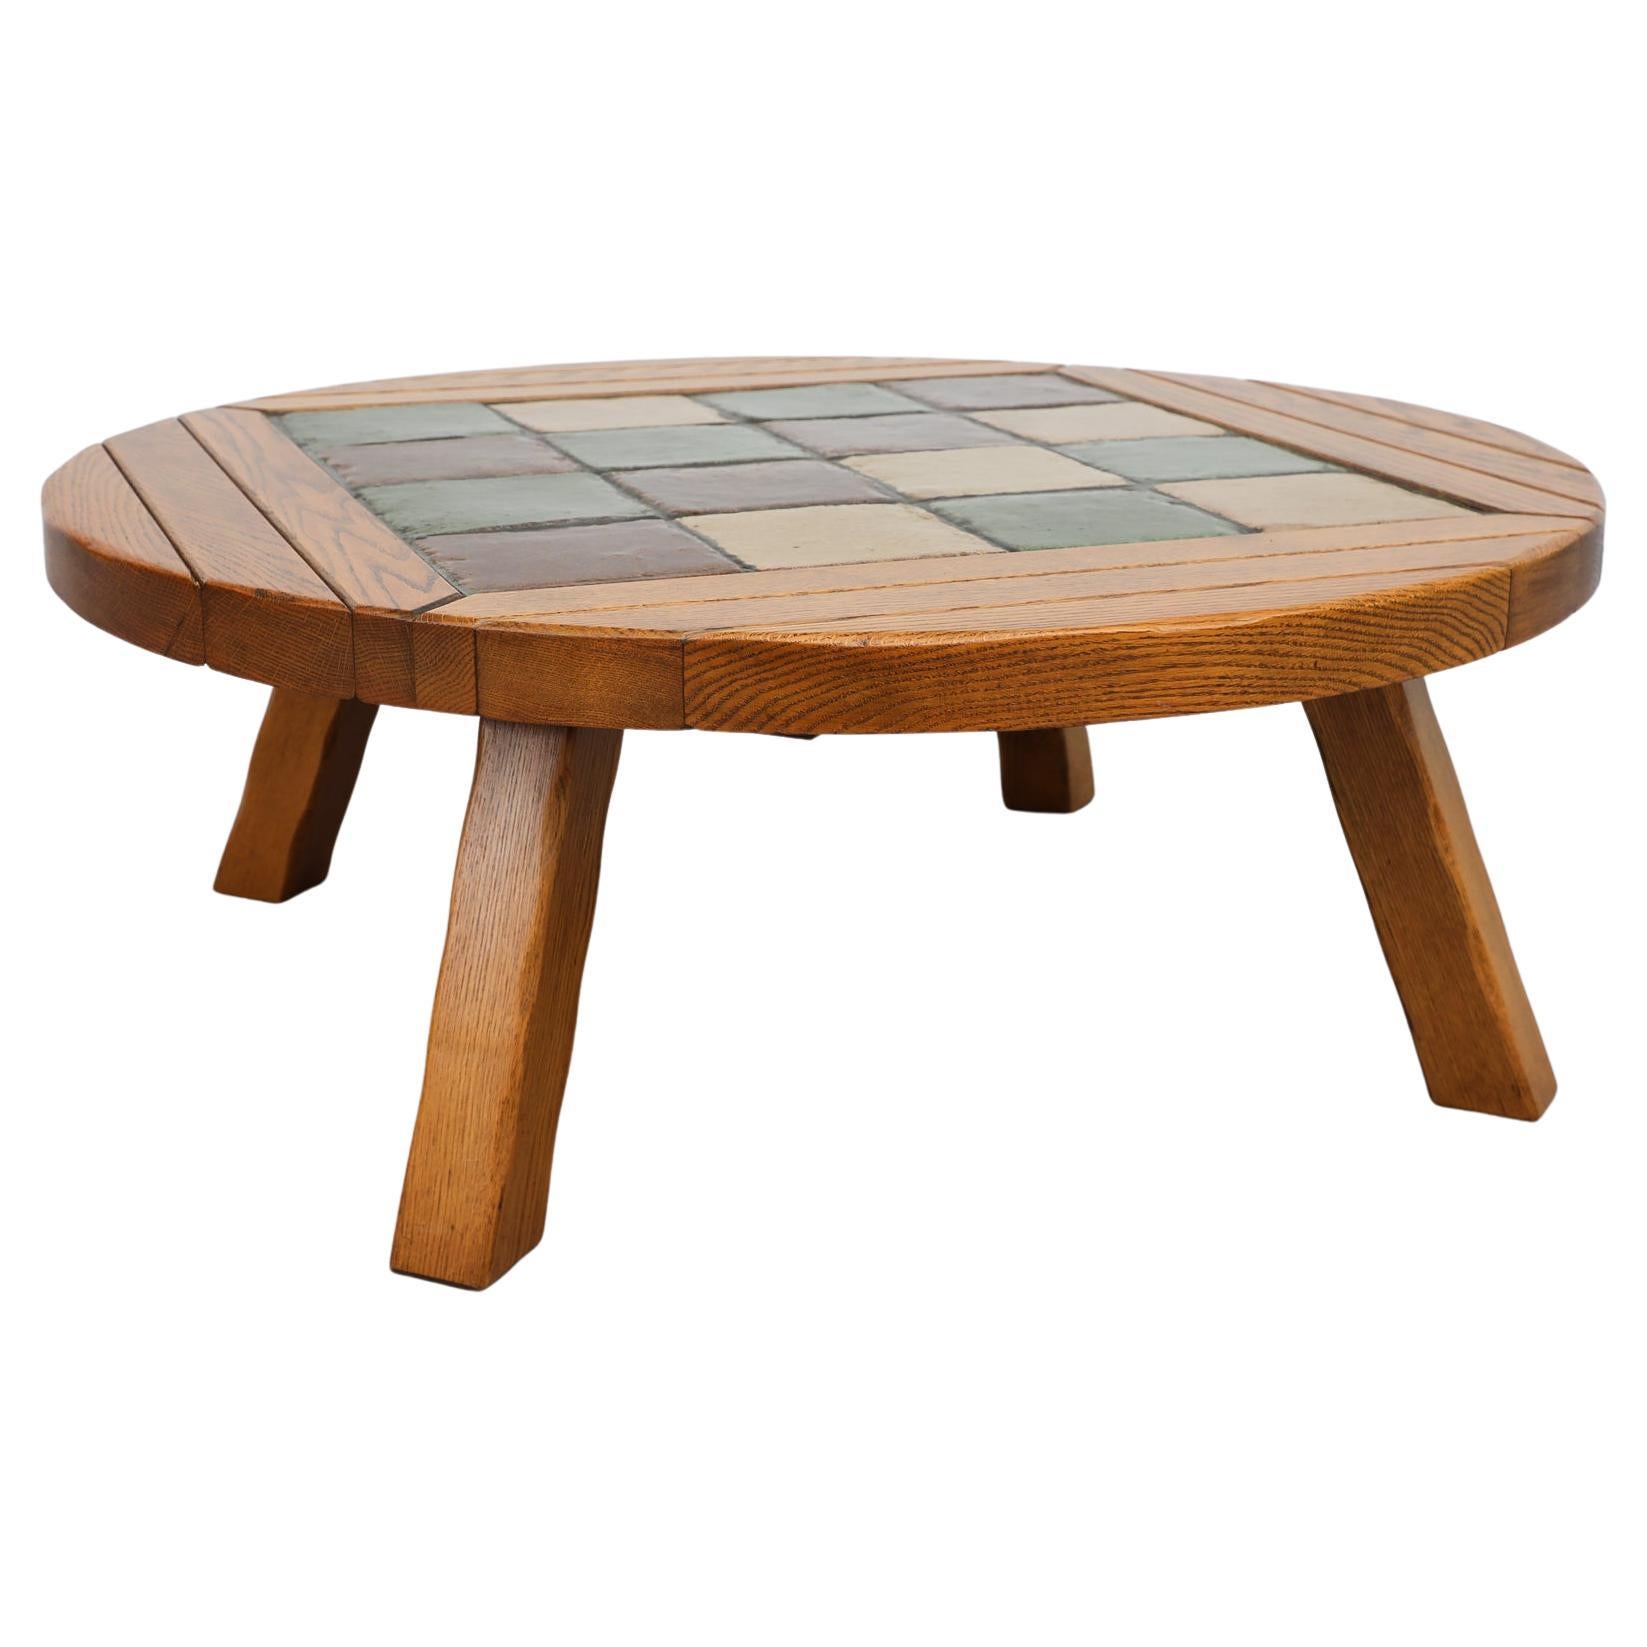 Roger Capron Style Round Coffee Table with Tile Top